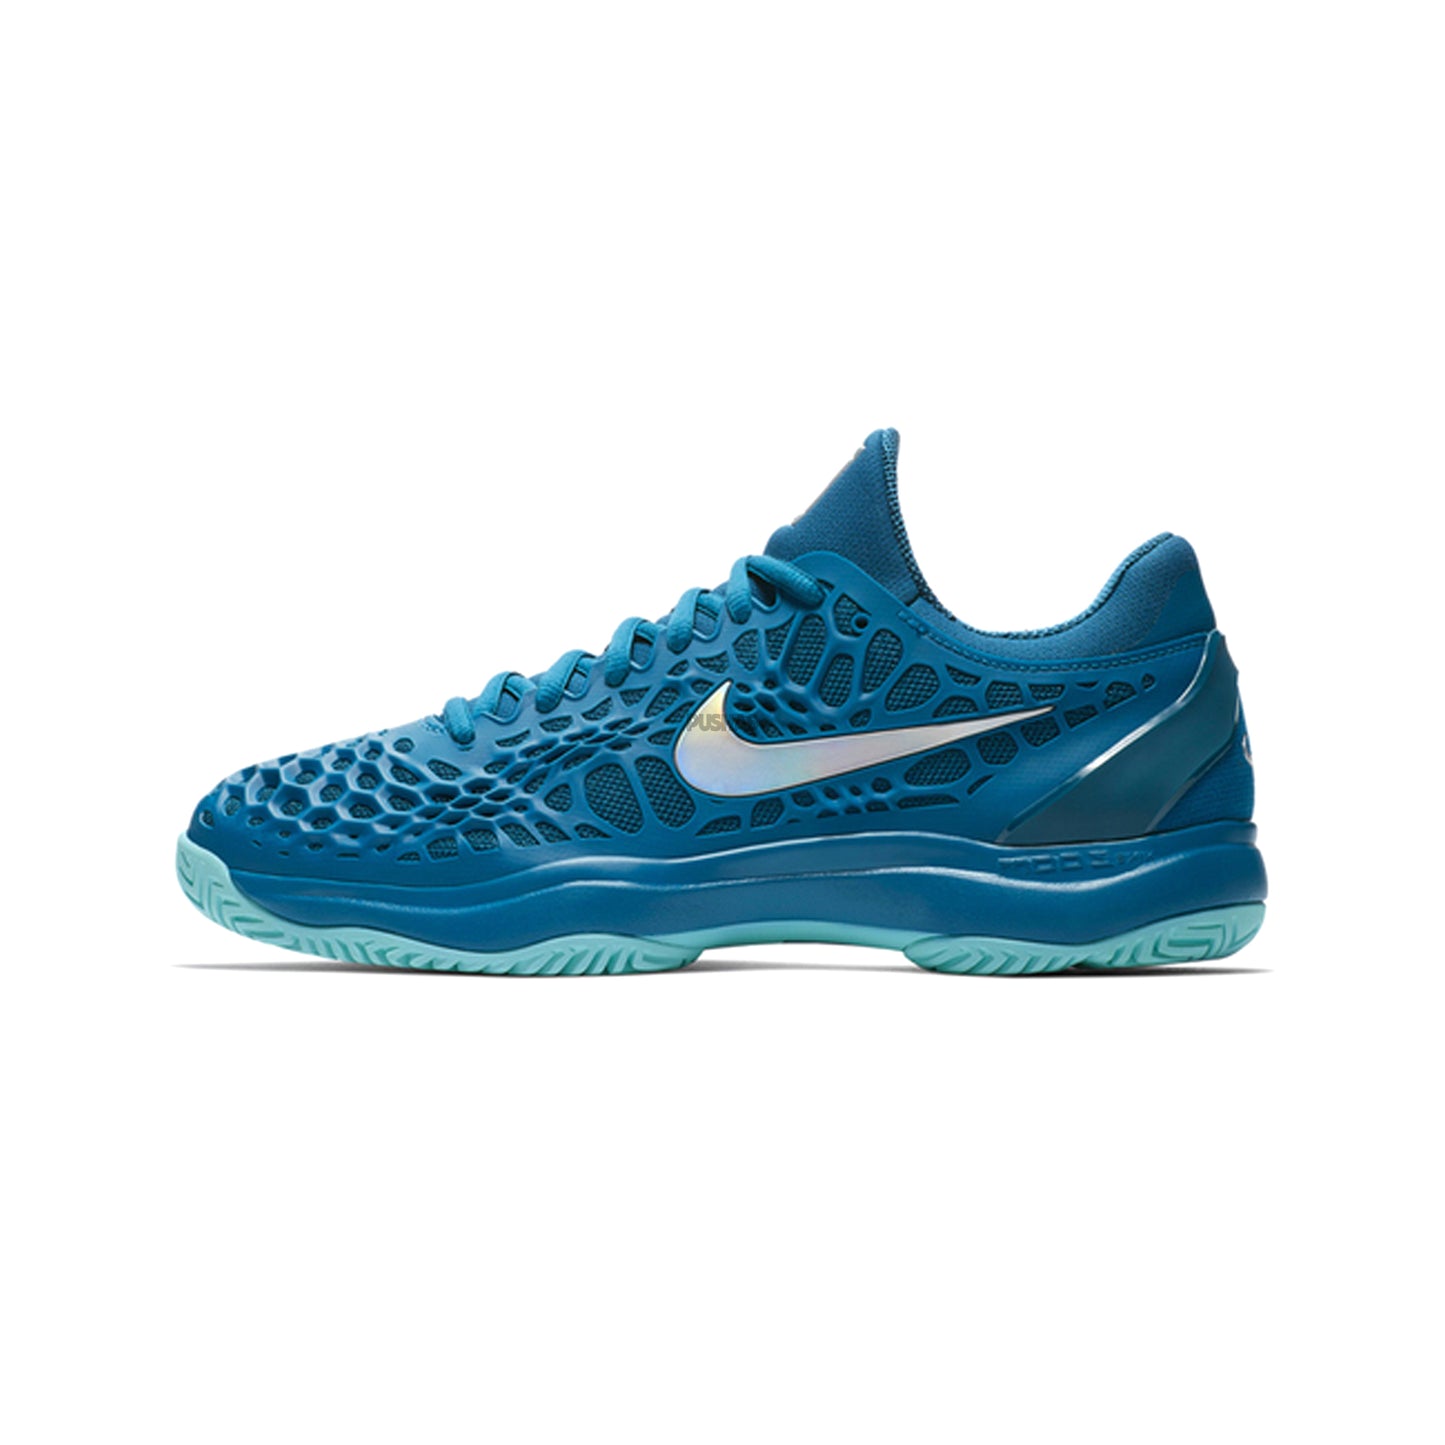 Nike Air Zoom Cage 3 HC 'Green Abyss Metallic Silver'